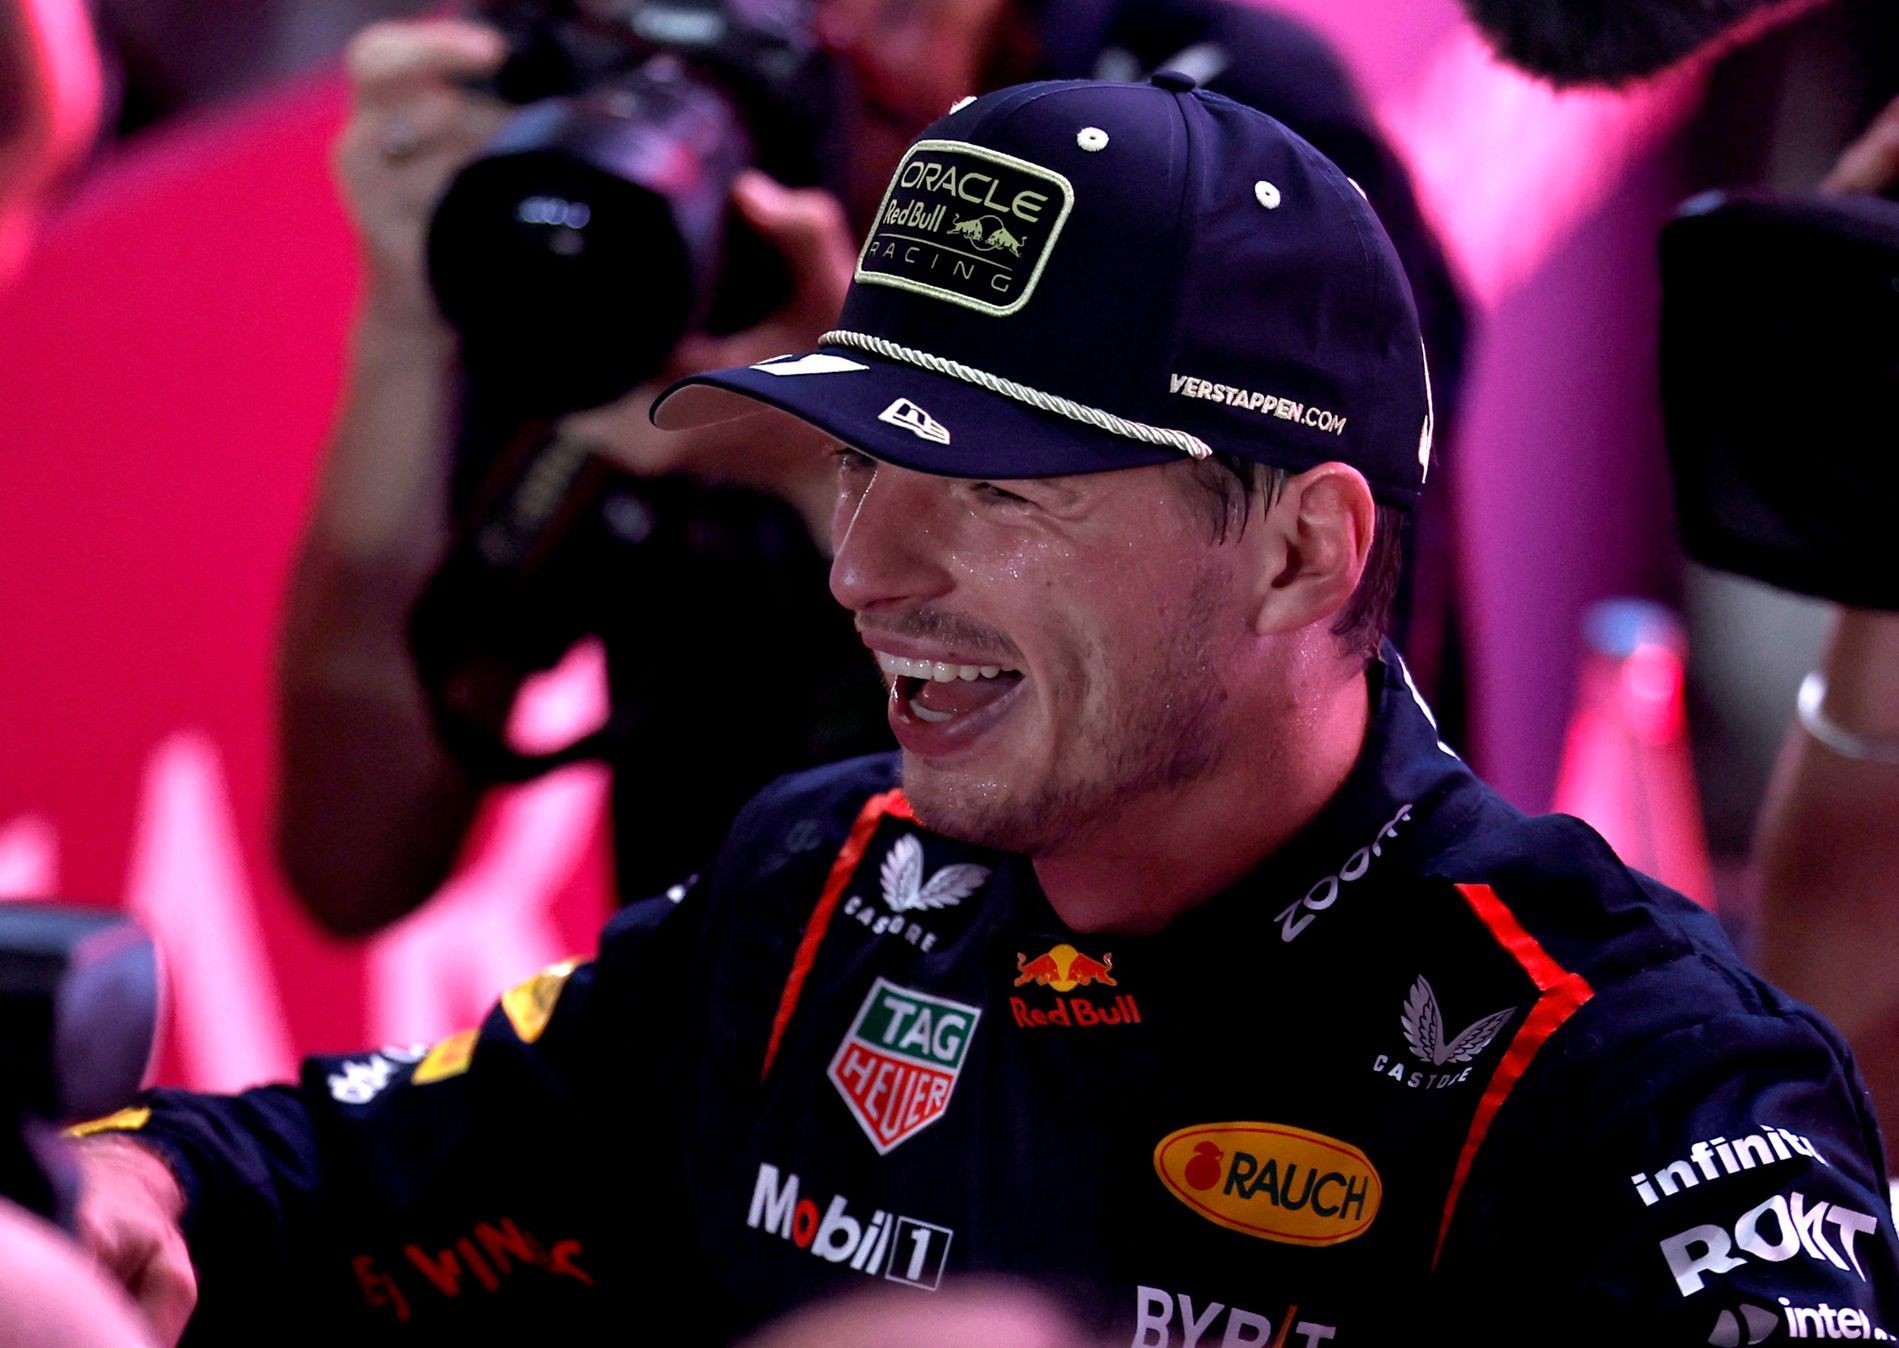 Mad Max is a cut diamond.  Verstappen has matured almost to perfection